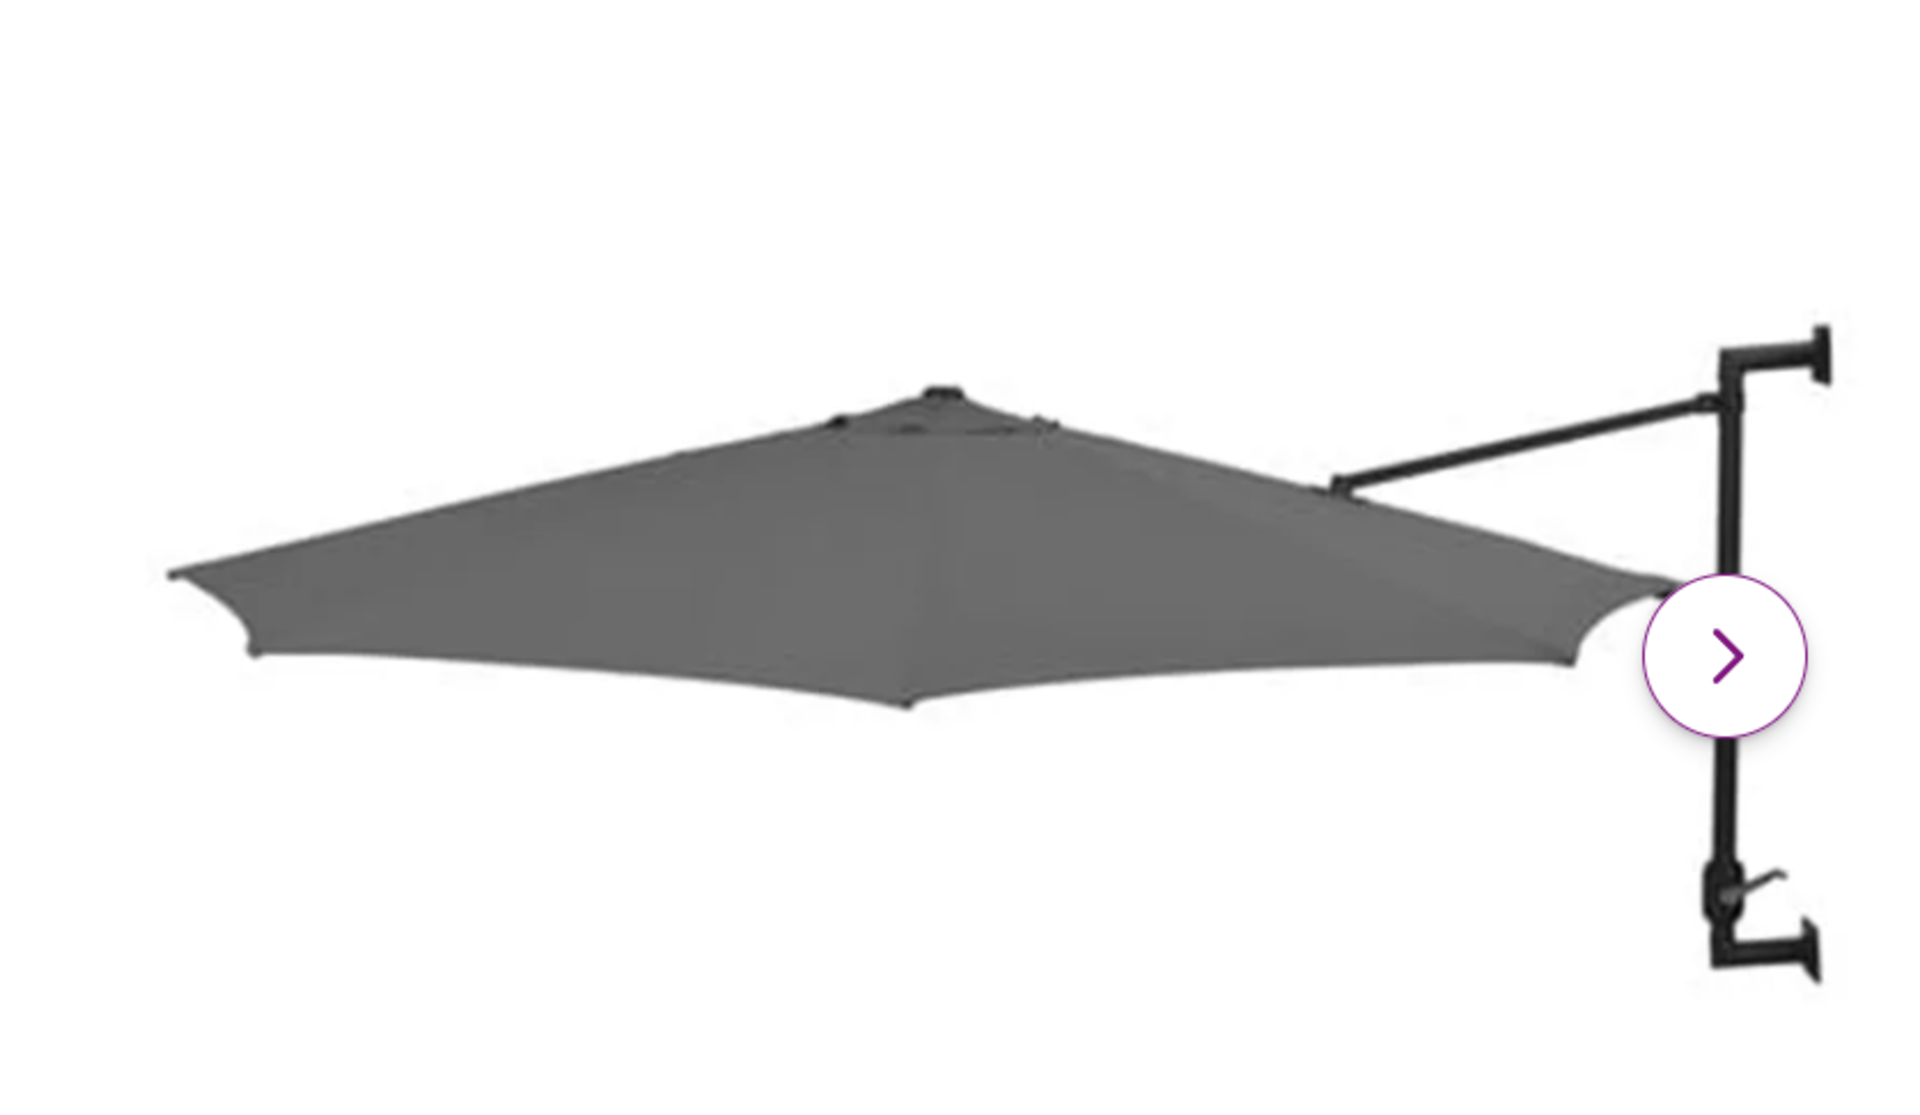 3m Wall Mounted Parasol. RRP £479.99. Made of UV protective and anti-fade polyester, the parasol